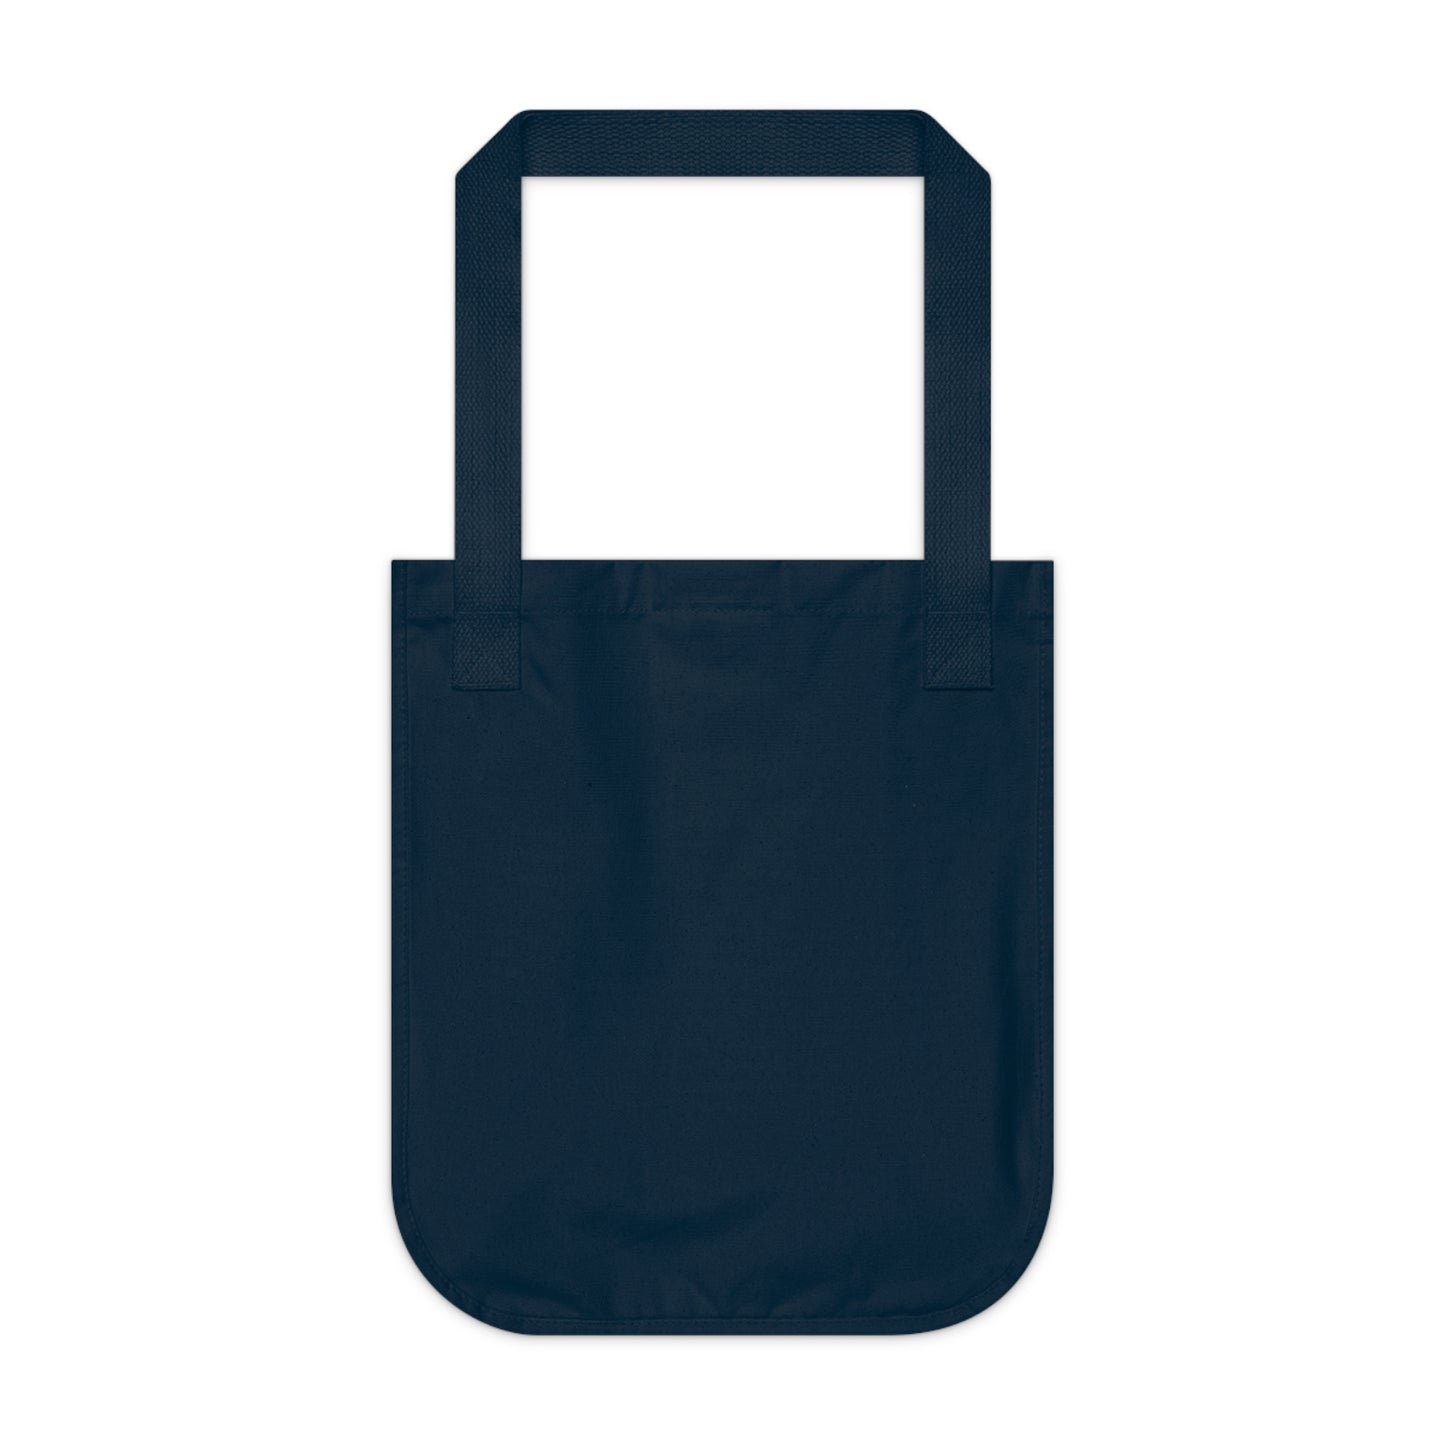 "Synthesis of Media: A Referential Artistic Exploration" - Bam Boo! Lifestyle Eco-friendly Tote Bag